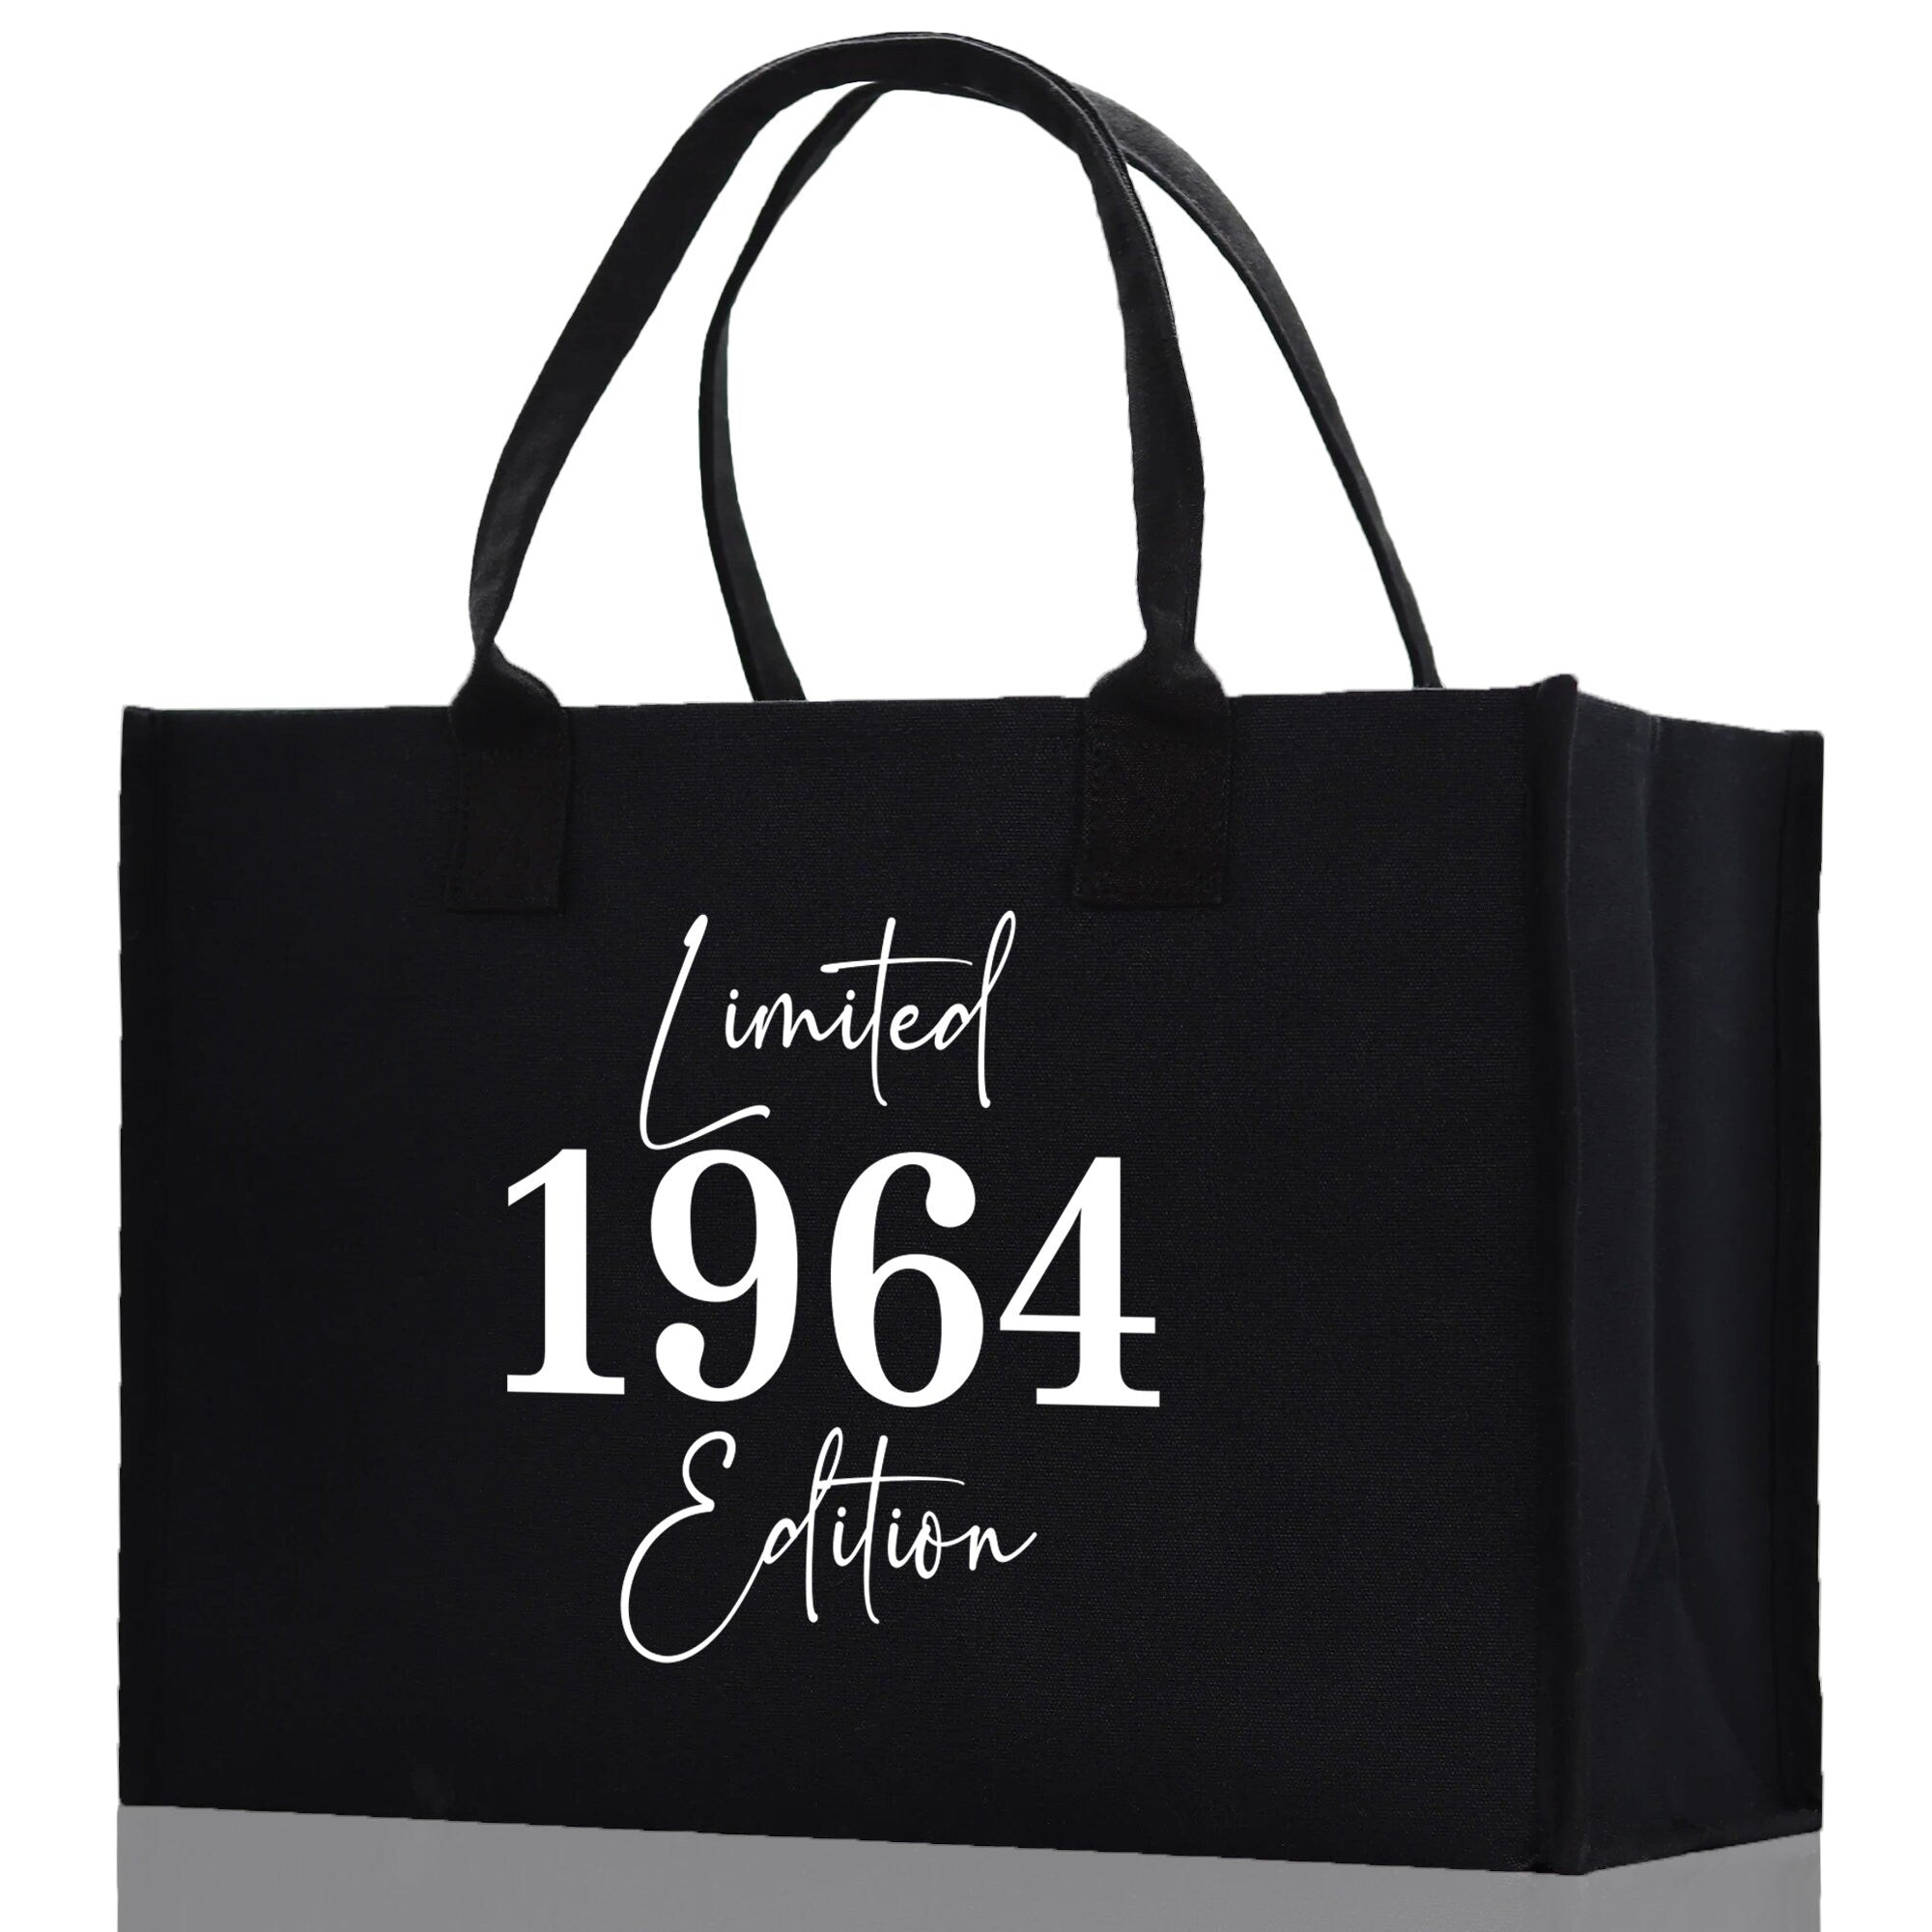 a black shopping bag with a white print on it